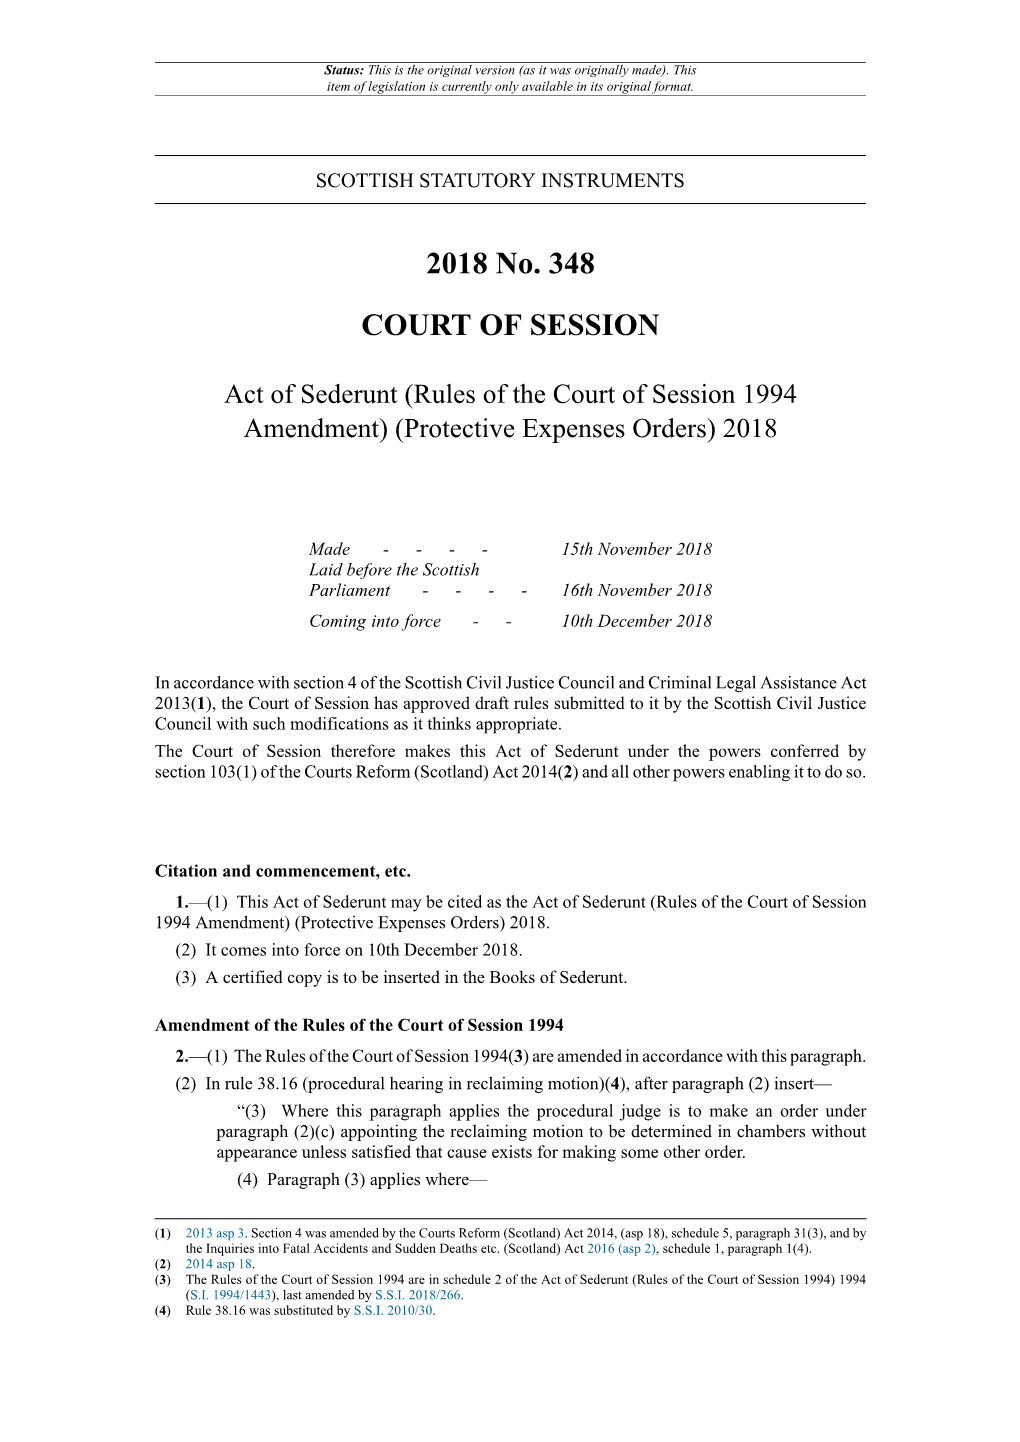 Act of Sederunt (Rules of the Court of Session 1994 Amendment) (Protective Expenses Orders) 2018